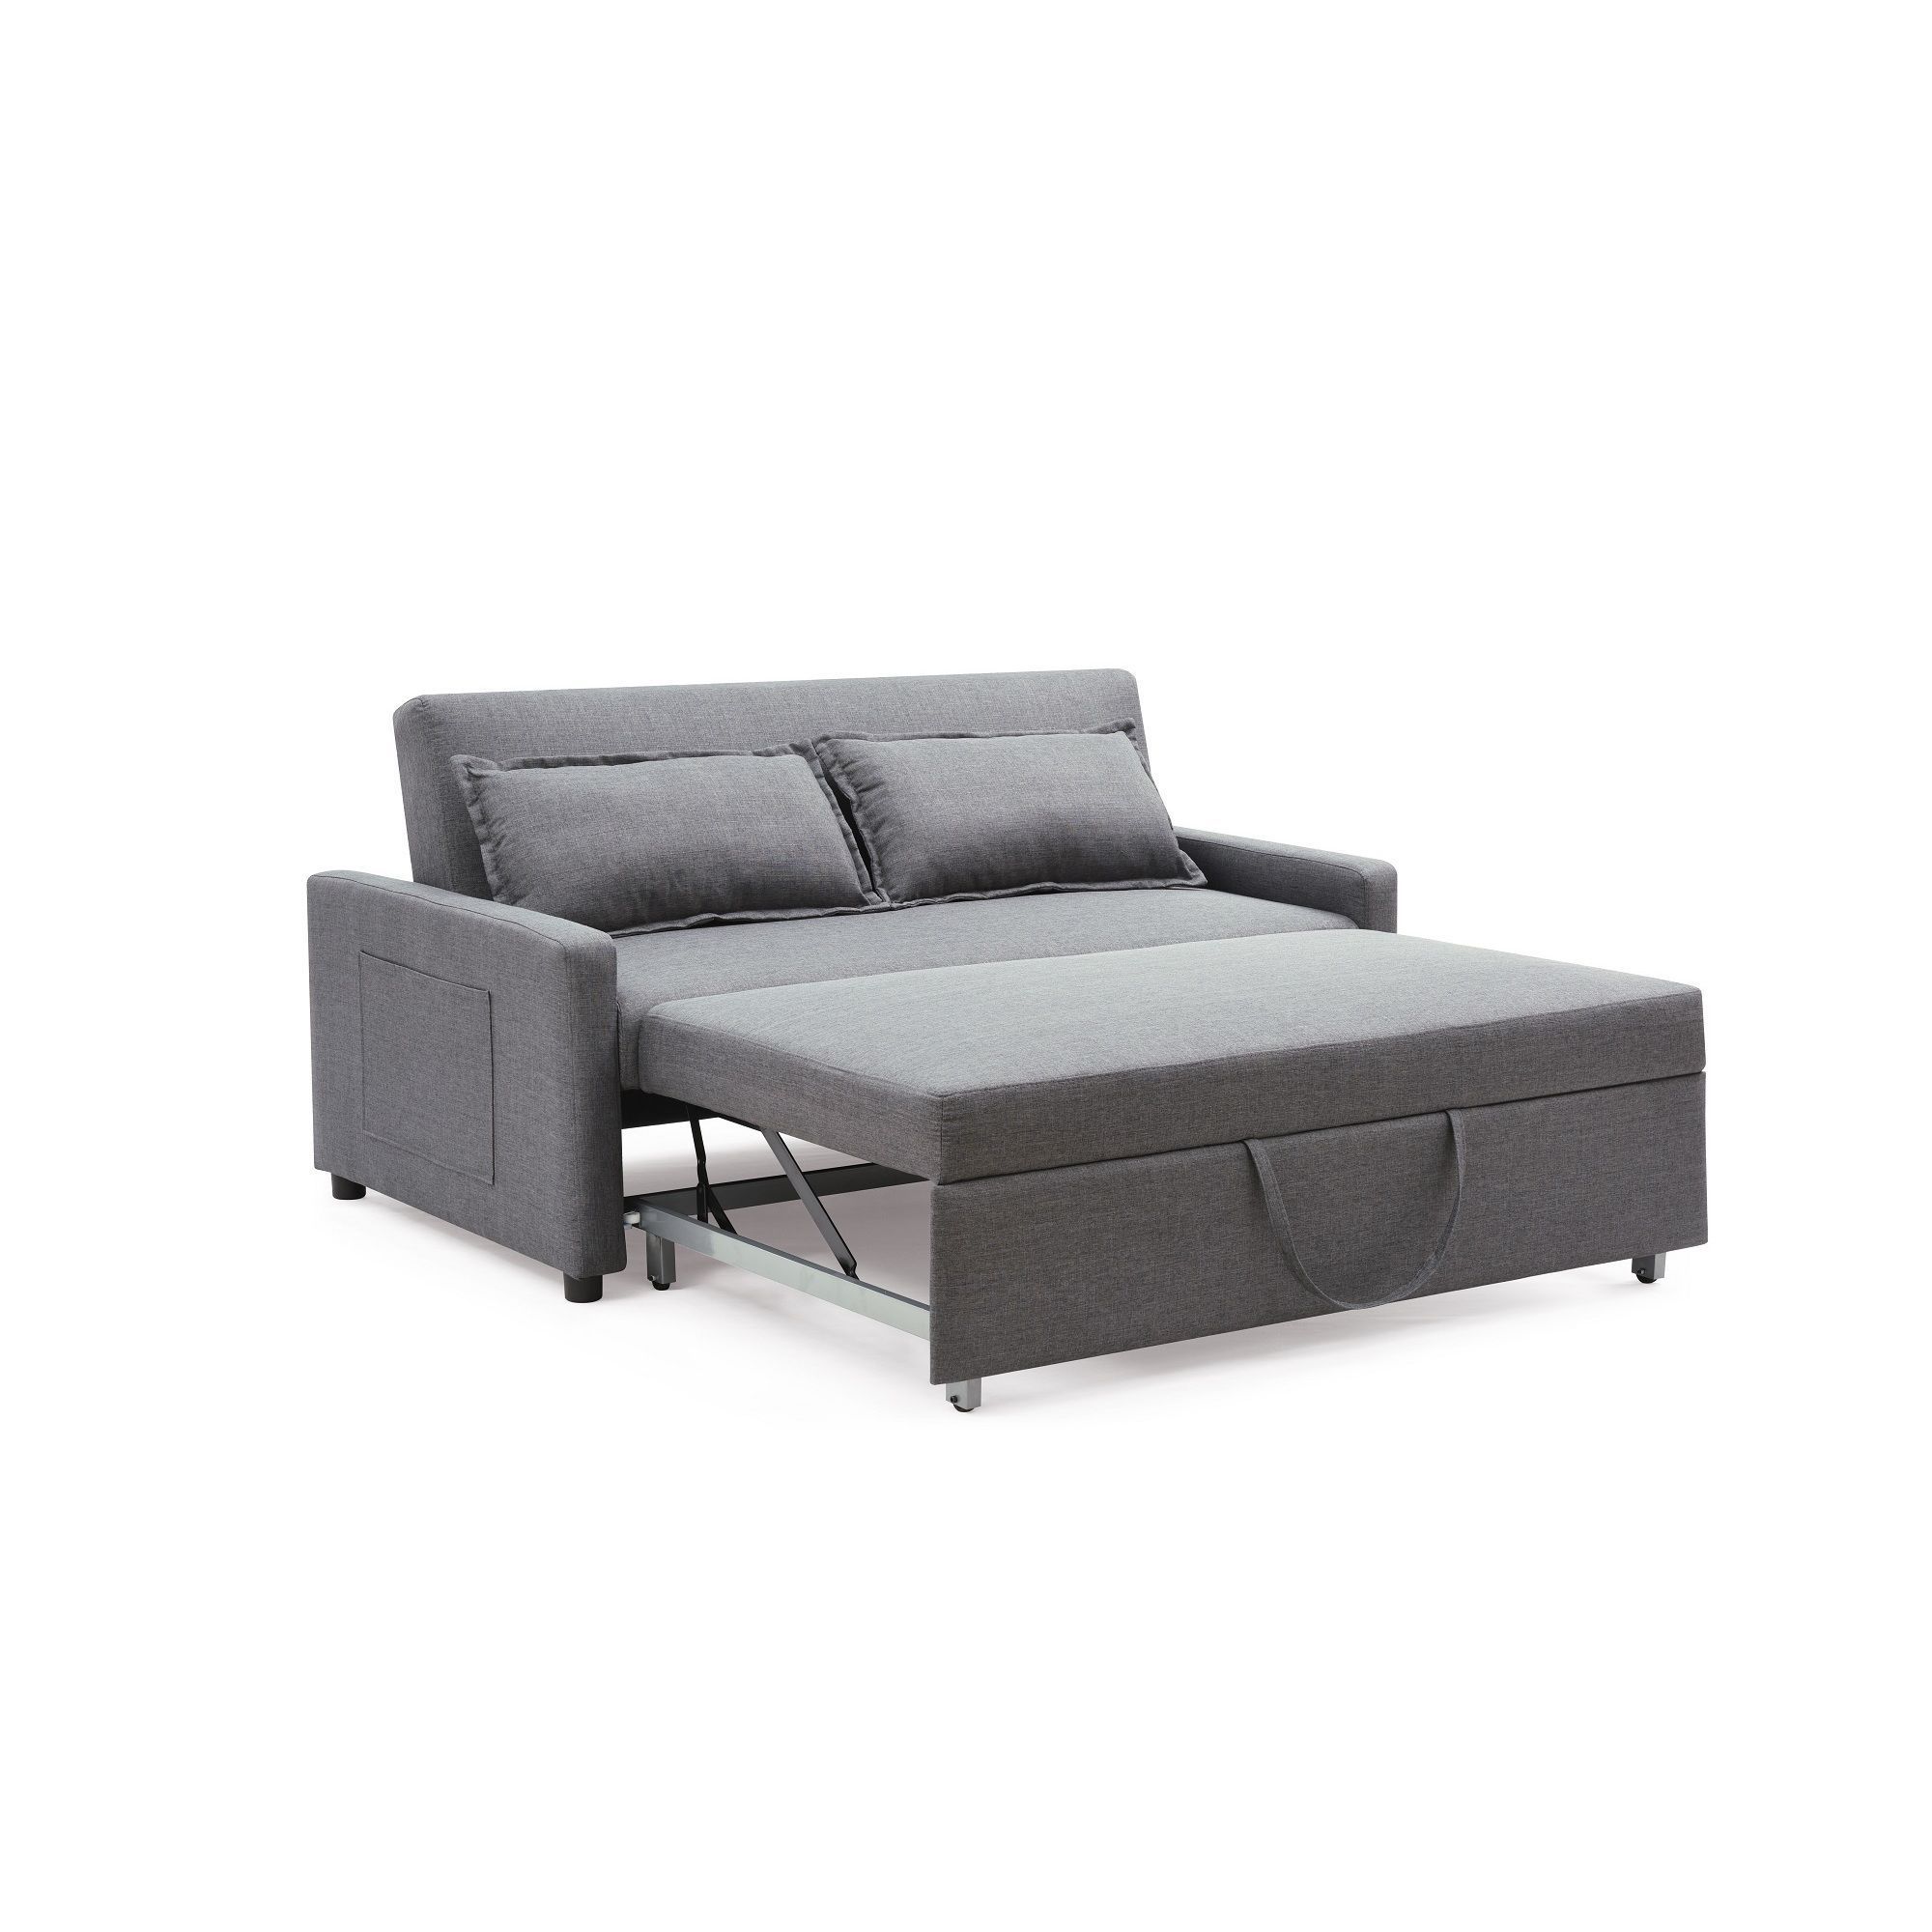 Overstock: Online Shopping – Bedding, Furniture, Electronics Intended For 2 In 1 Gray Pull Out Sofa Beds (Gallery 7 of 20)